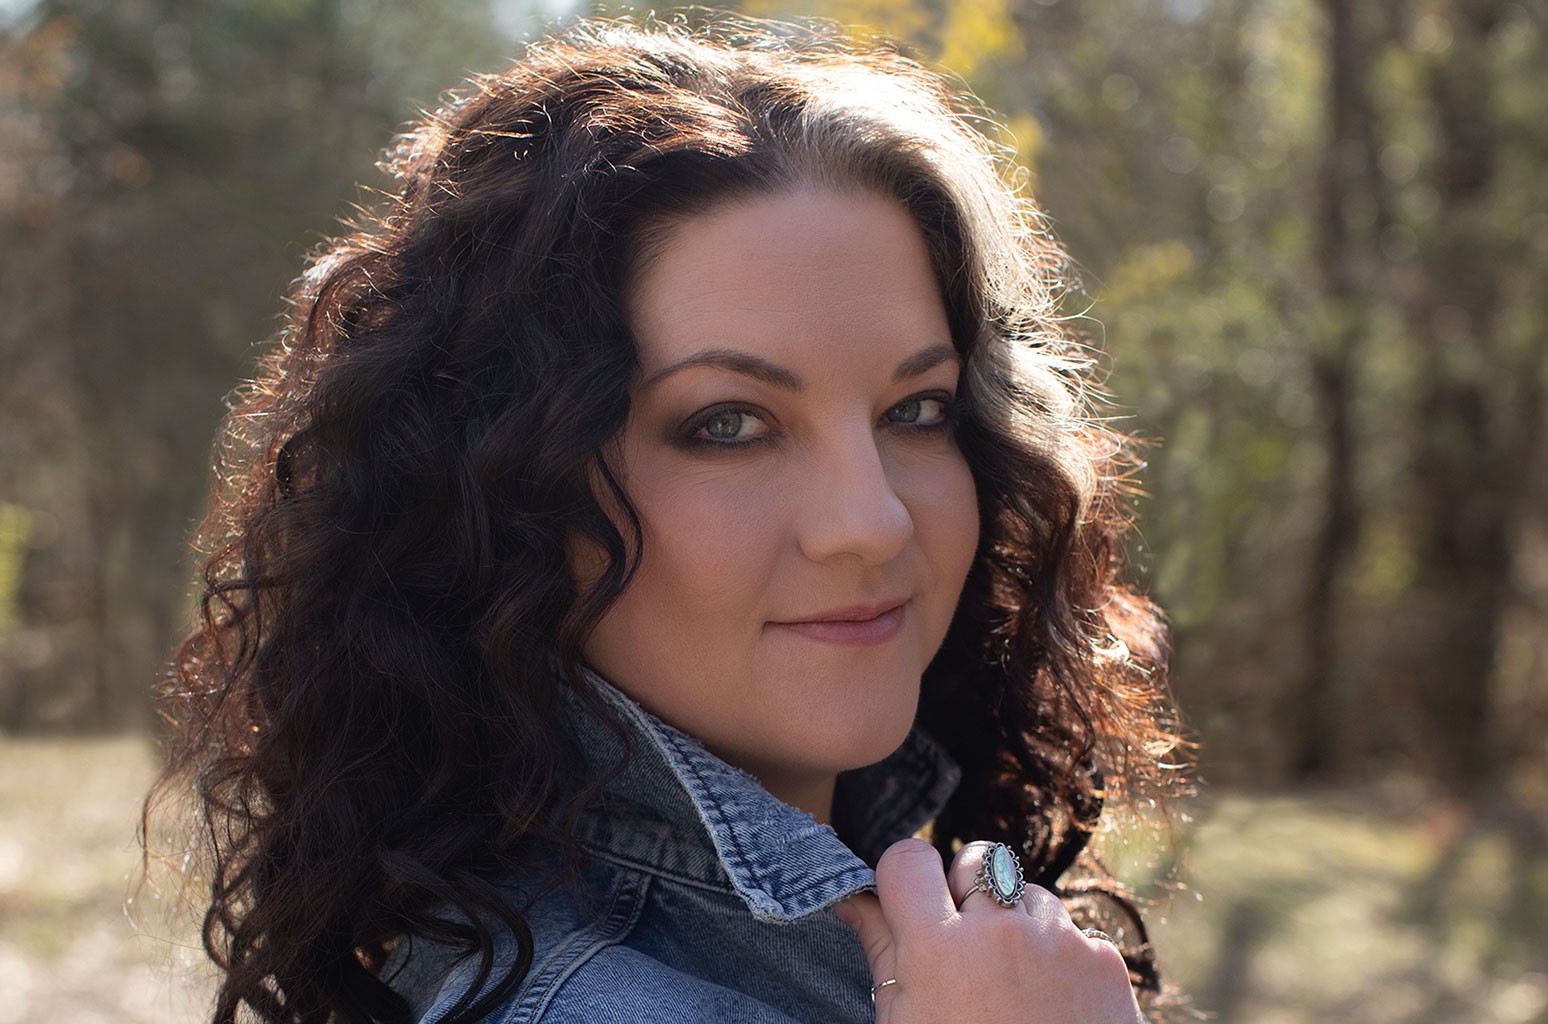 Ashley McBryde Recovering After Horseback Riding Accident That Left Her